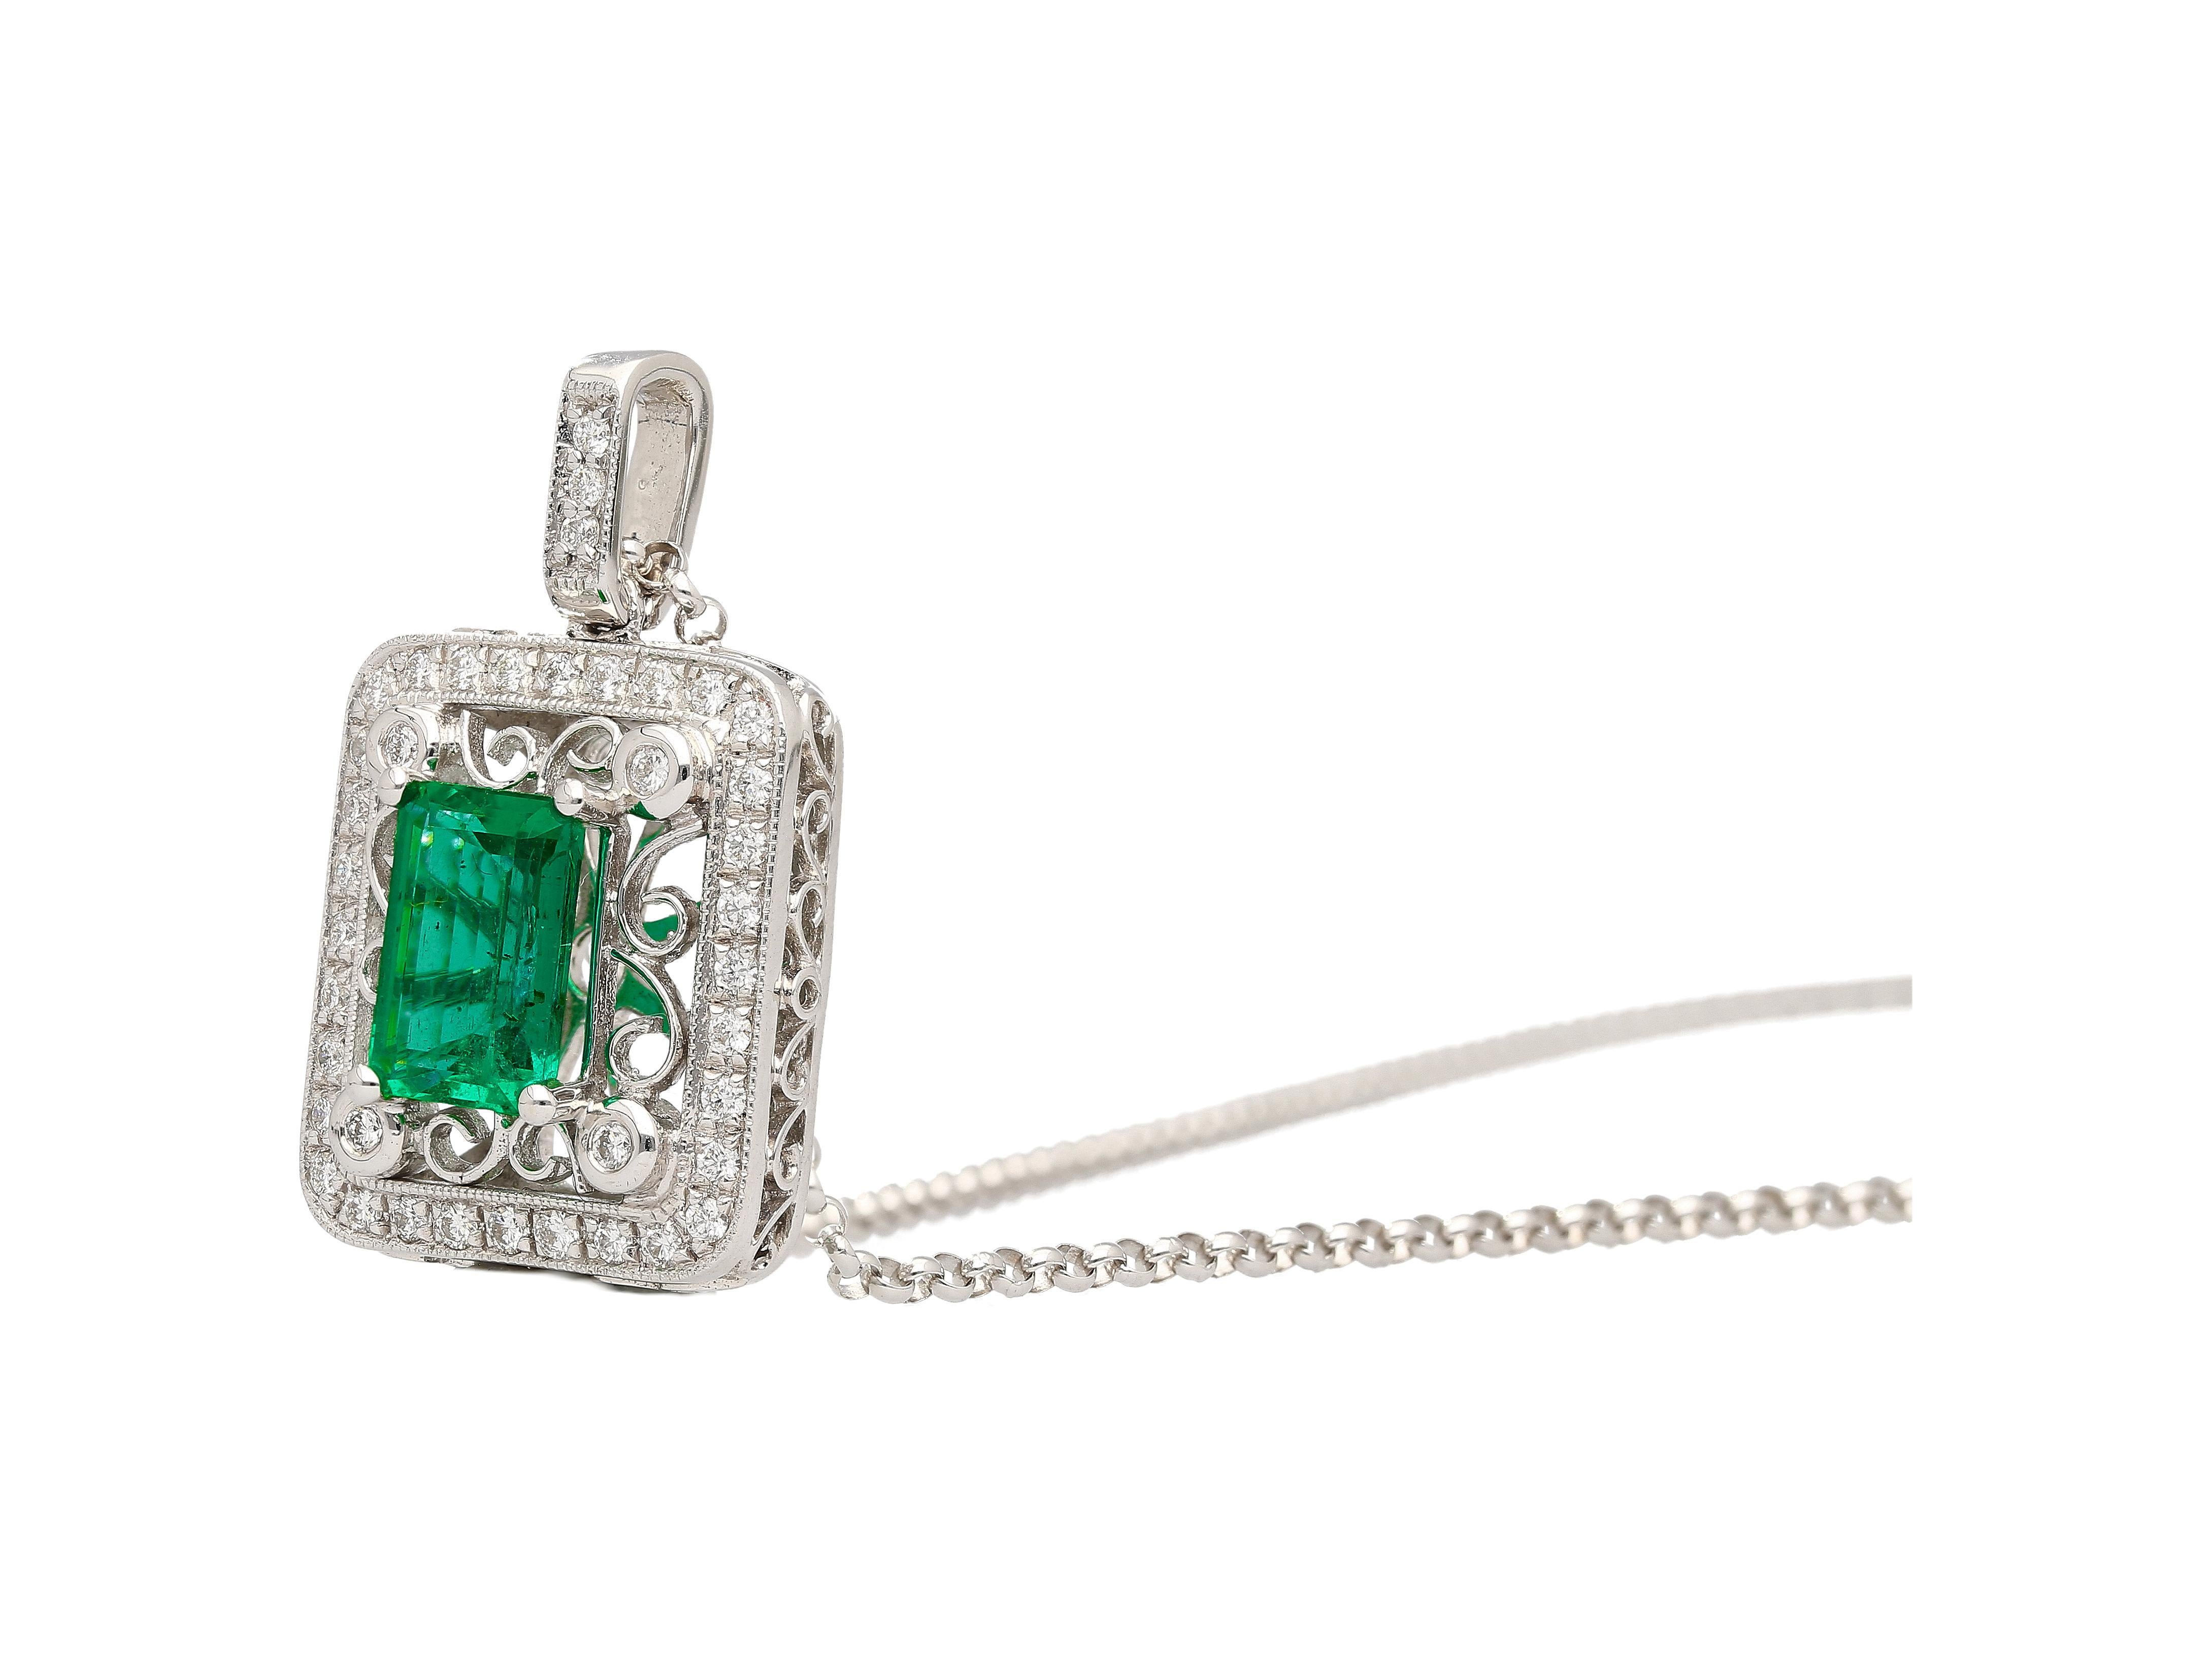 GIA Certified 1.39 Carat Zambian Emerald and Diamond Floral Box Pendant Necklace For Sale 3